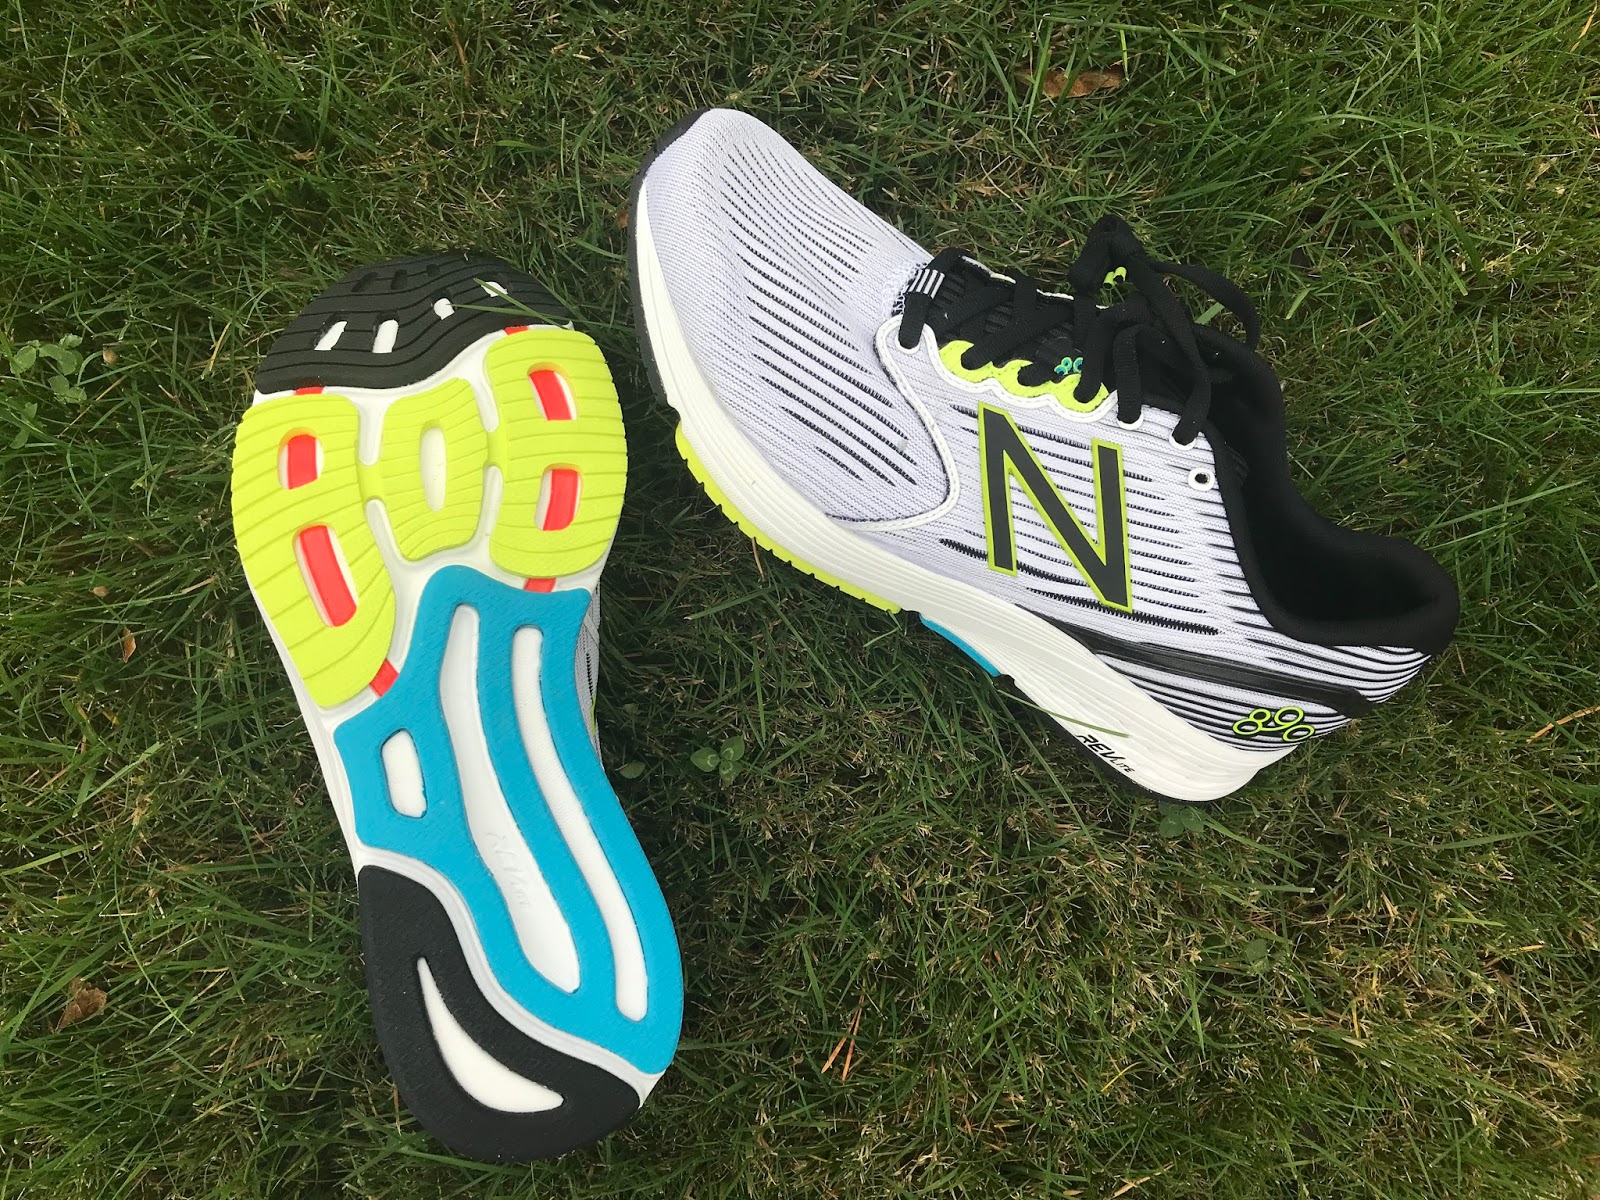 Road Trail Run: New Balance 890v6 Review: A Firm, Stable Rocket حمضيات